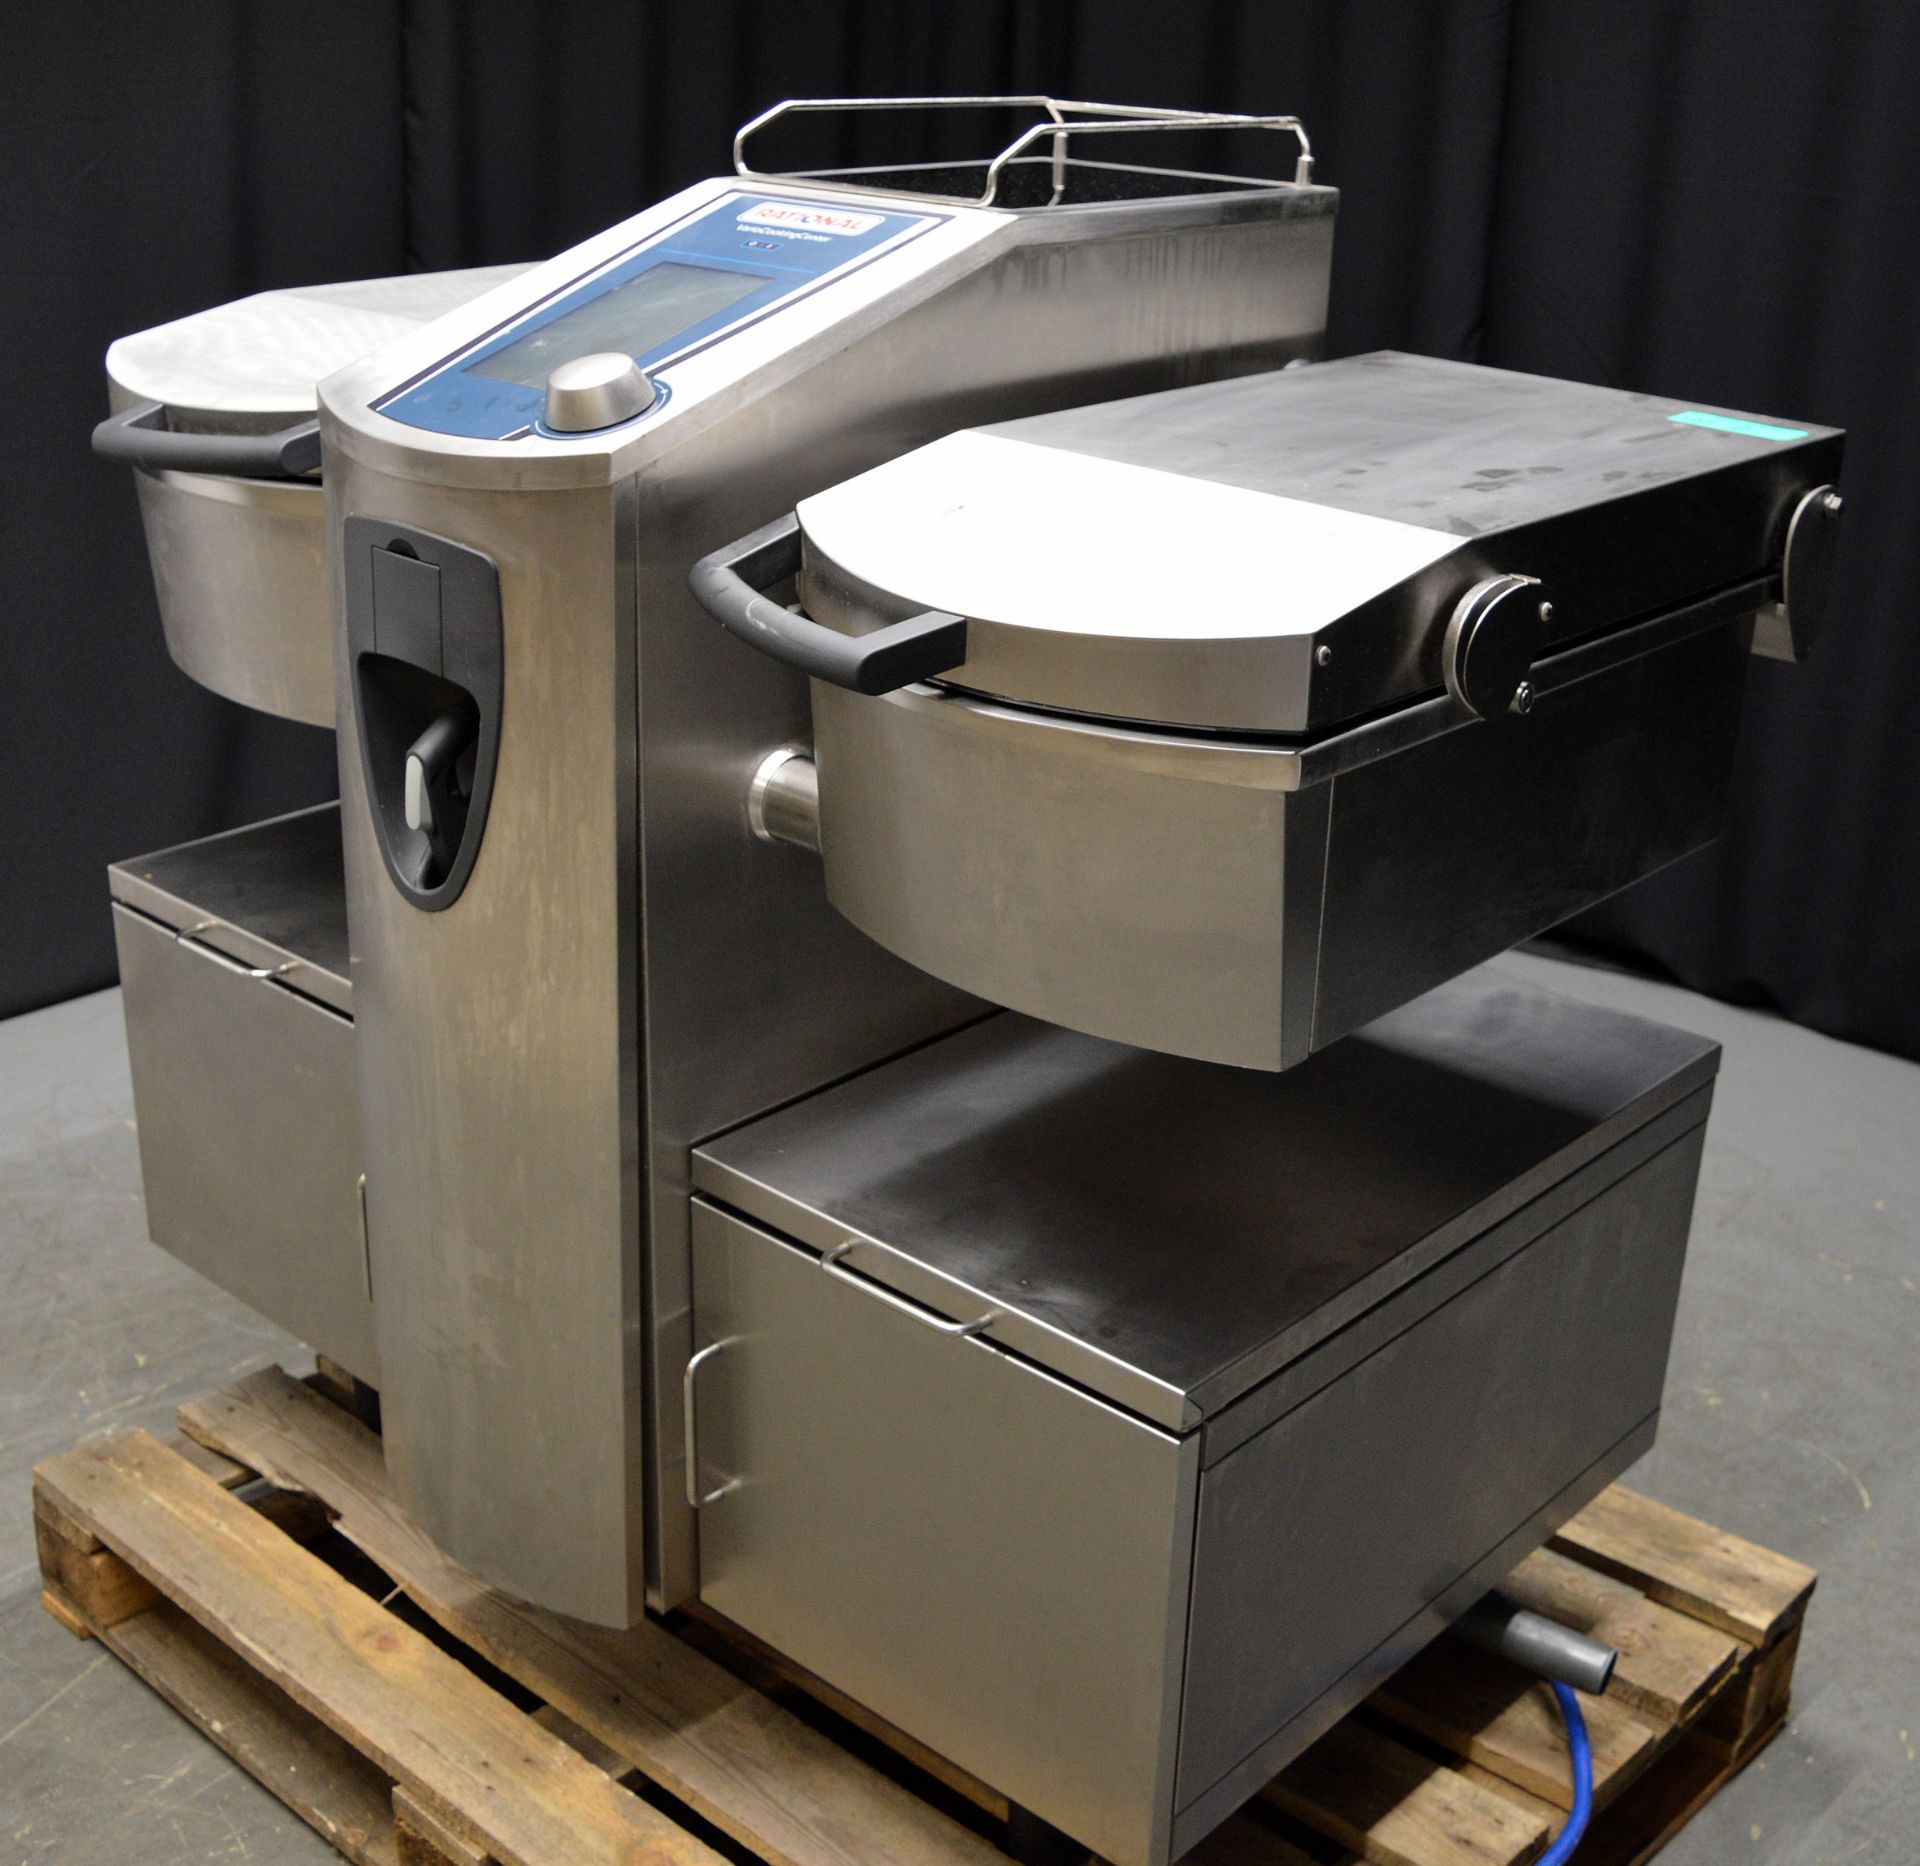 Rational VarioCookingCenter VCC112+, ex demo model, 3 phase electric - Image 3 of 11